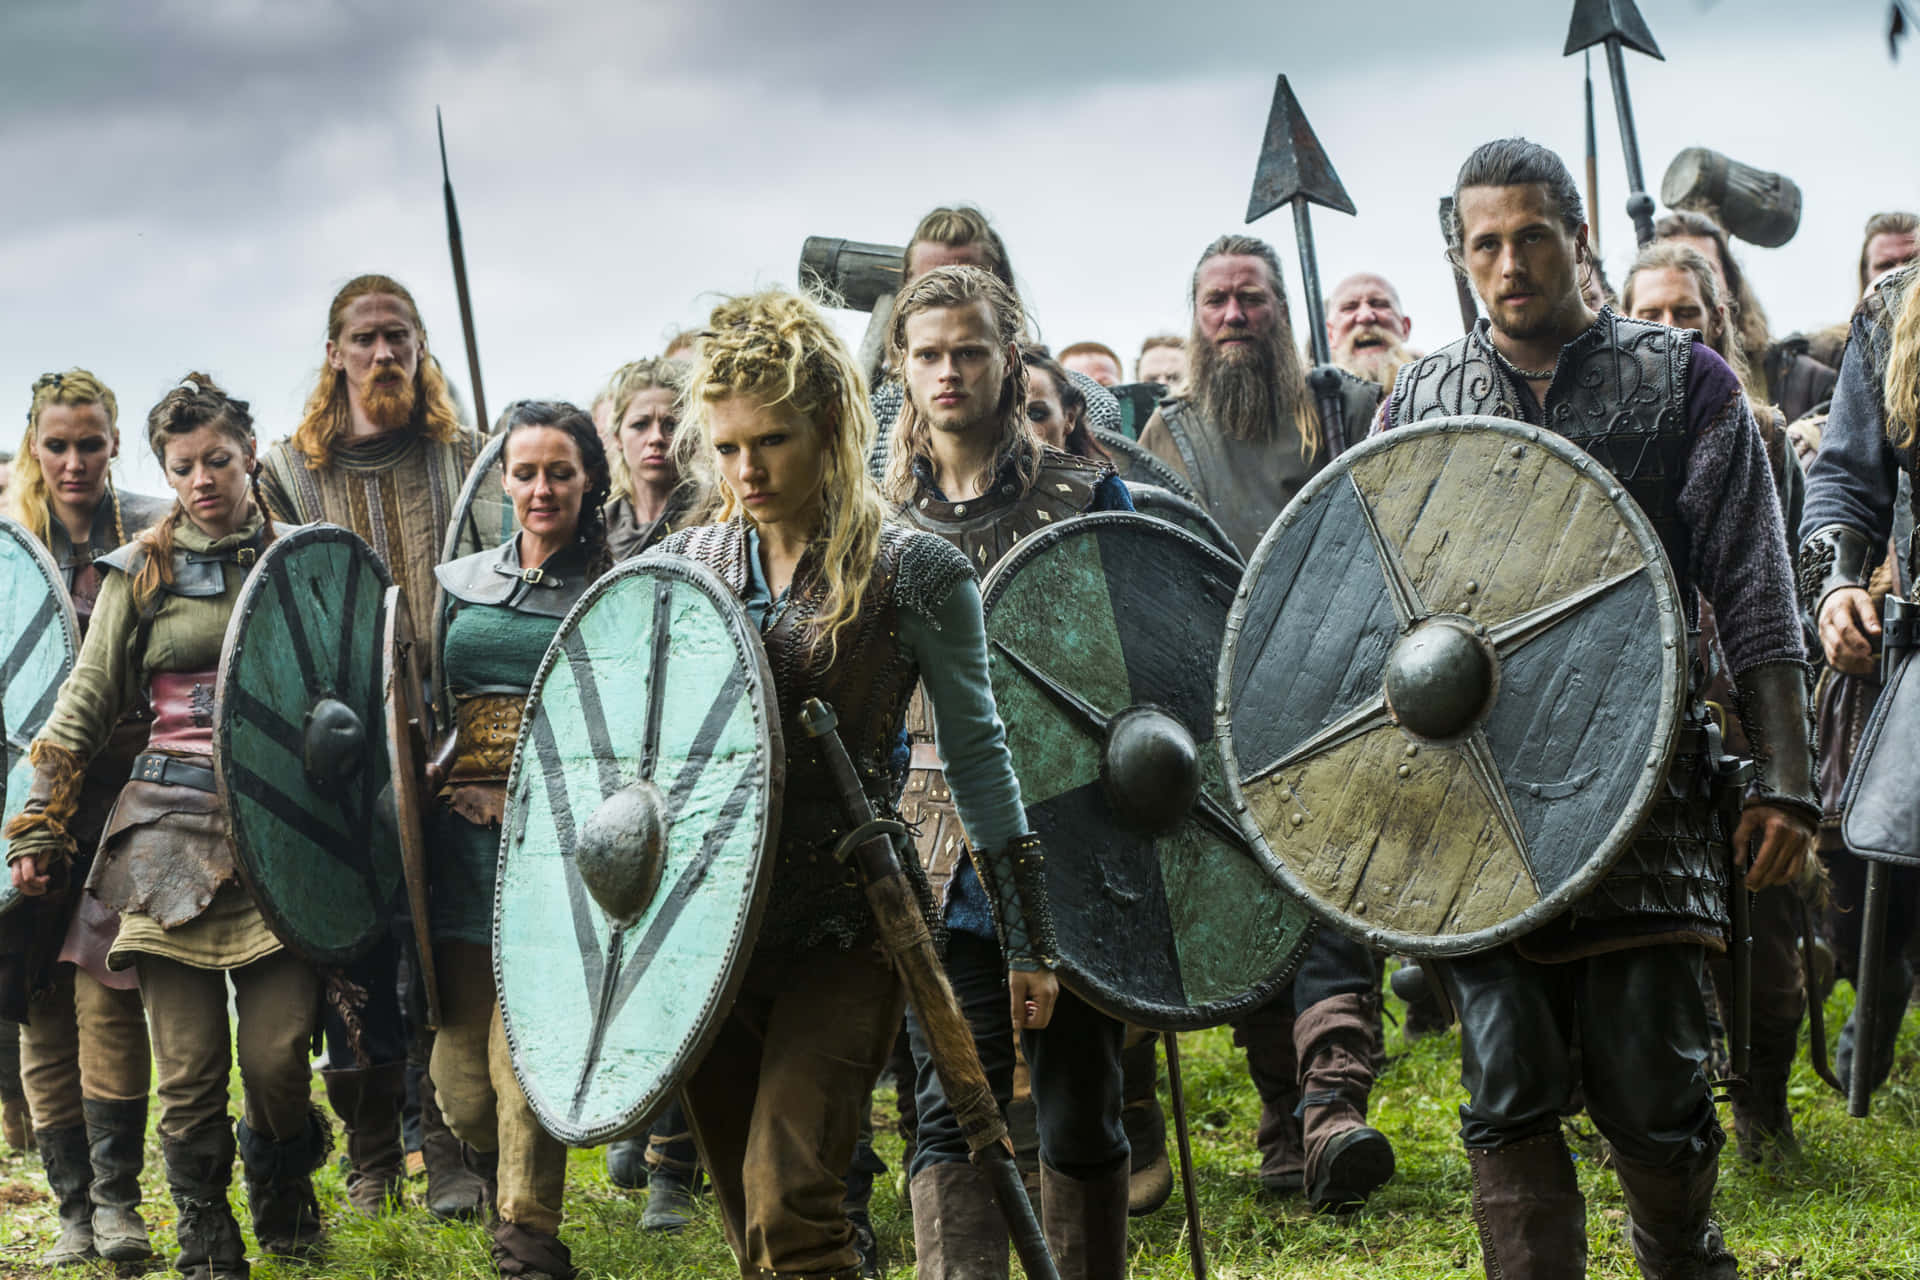 The ancient Norse saga of the Vikings comes alive